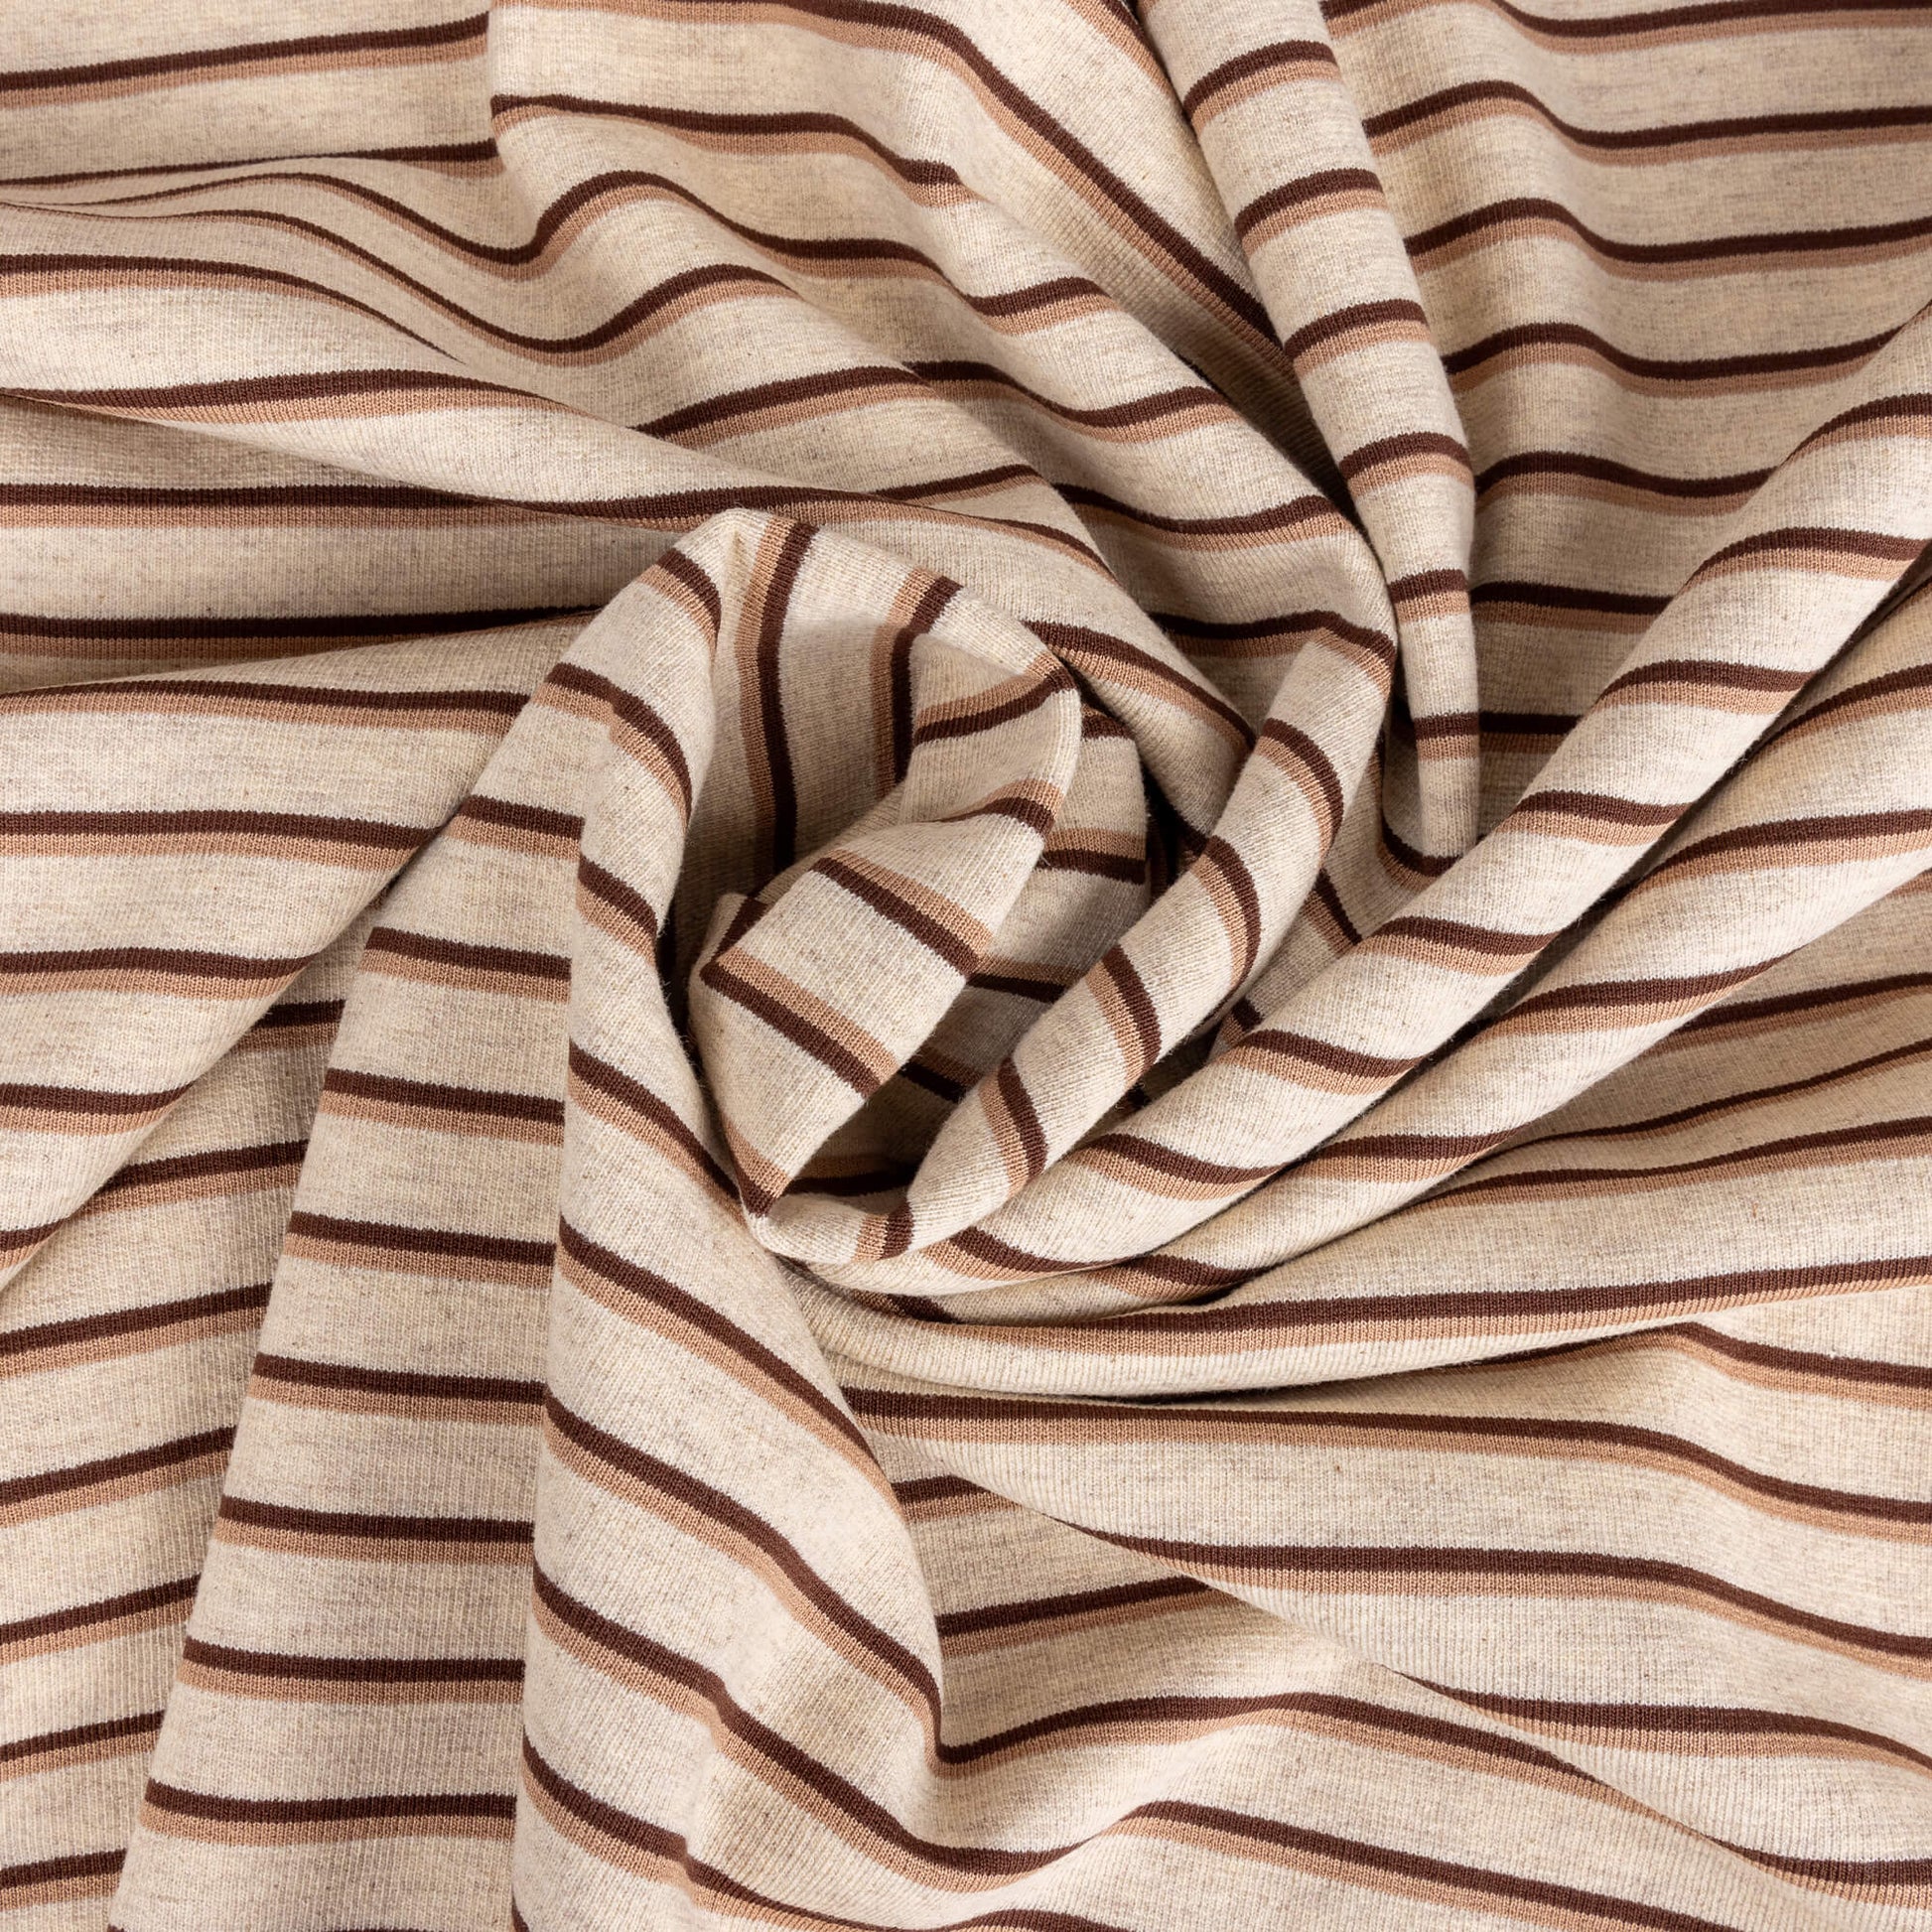 A messy ball of Ecru, brown and beige striped soft t-shirt material in a jersey fabric for making clothing or crafting projects.